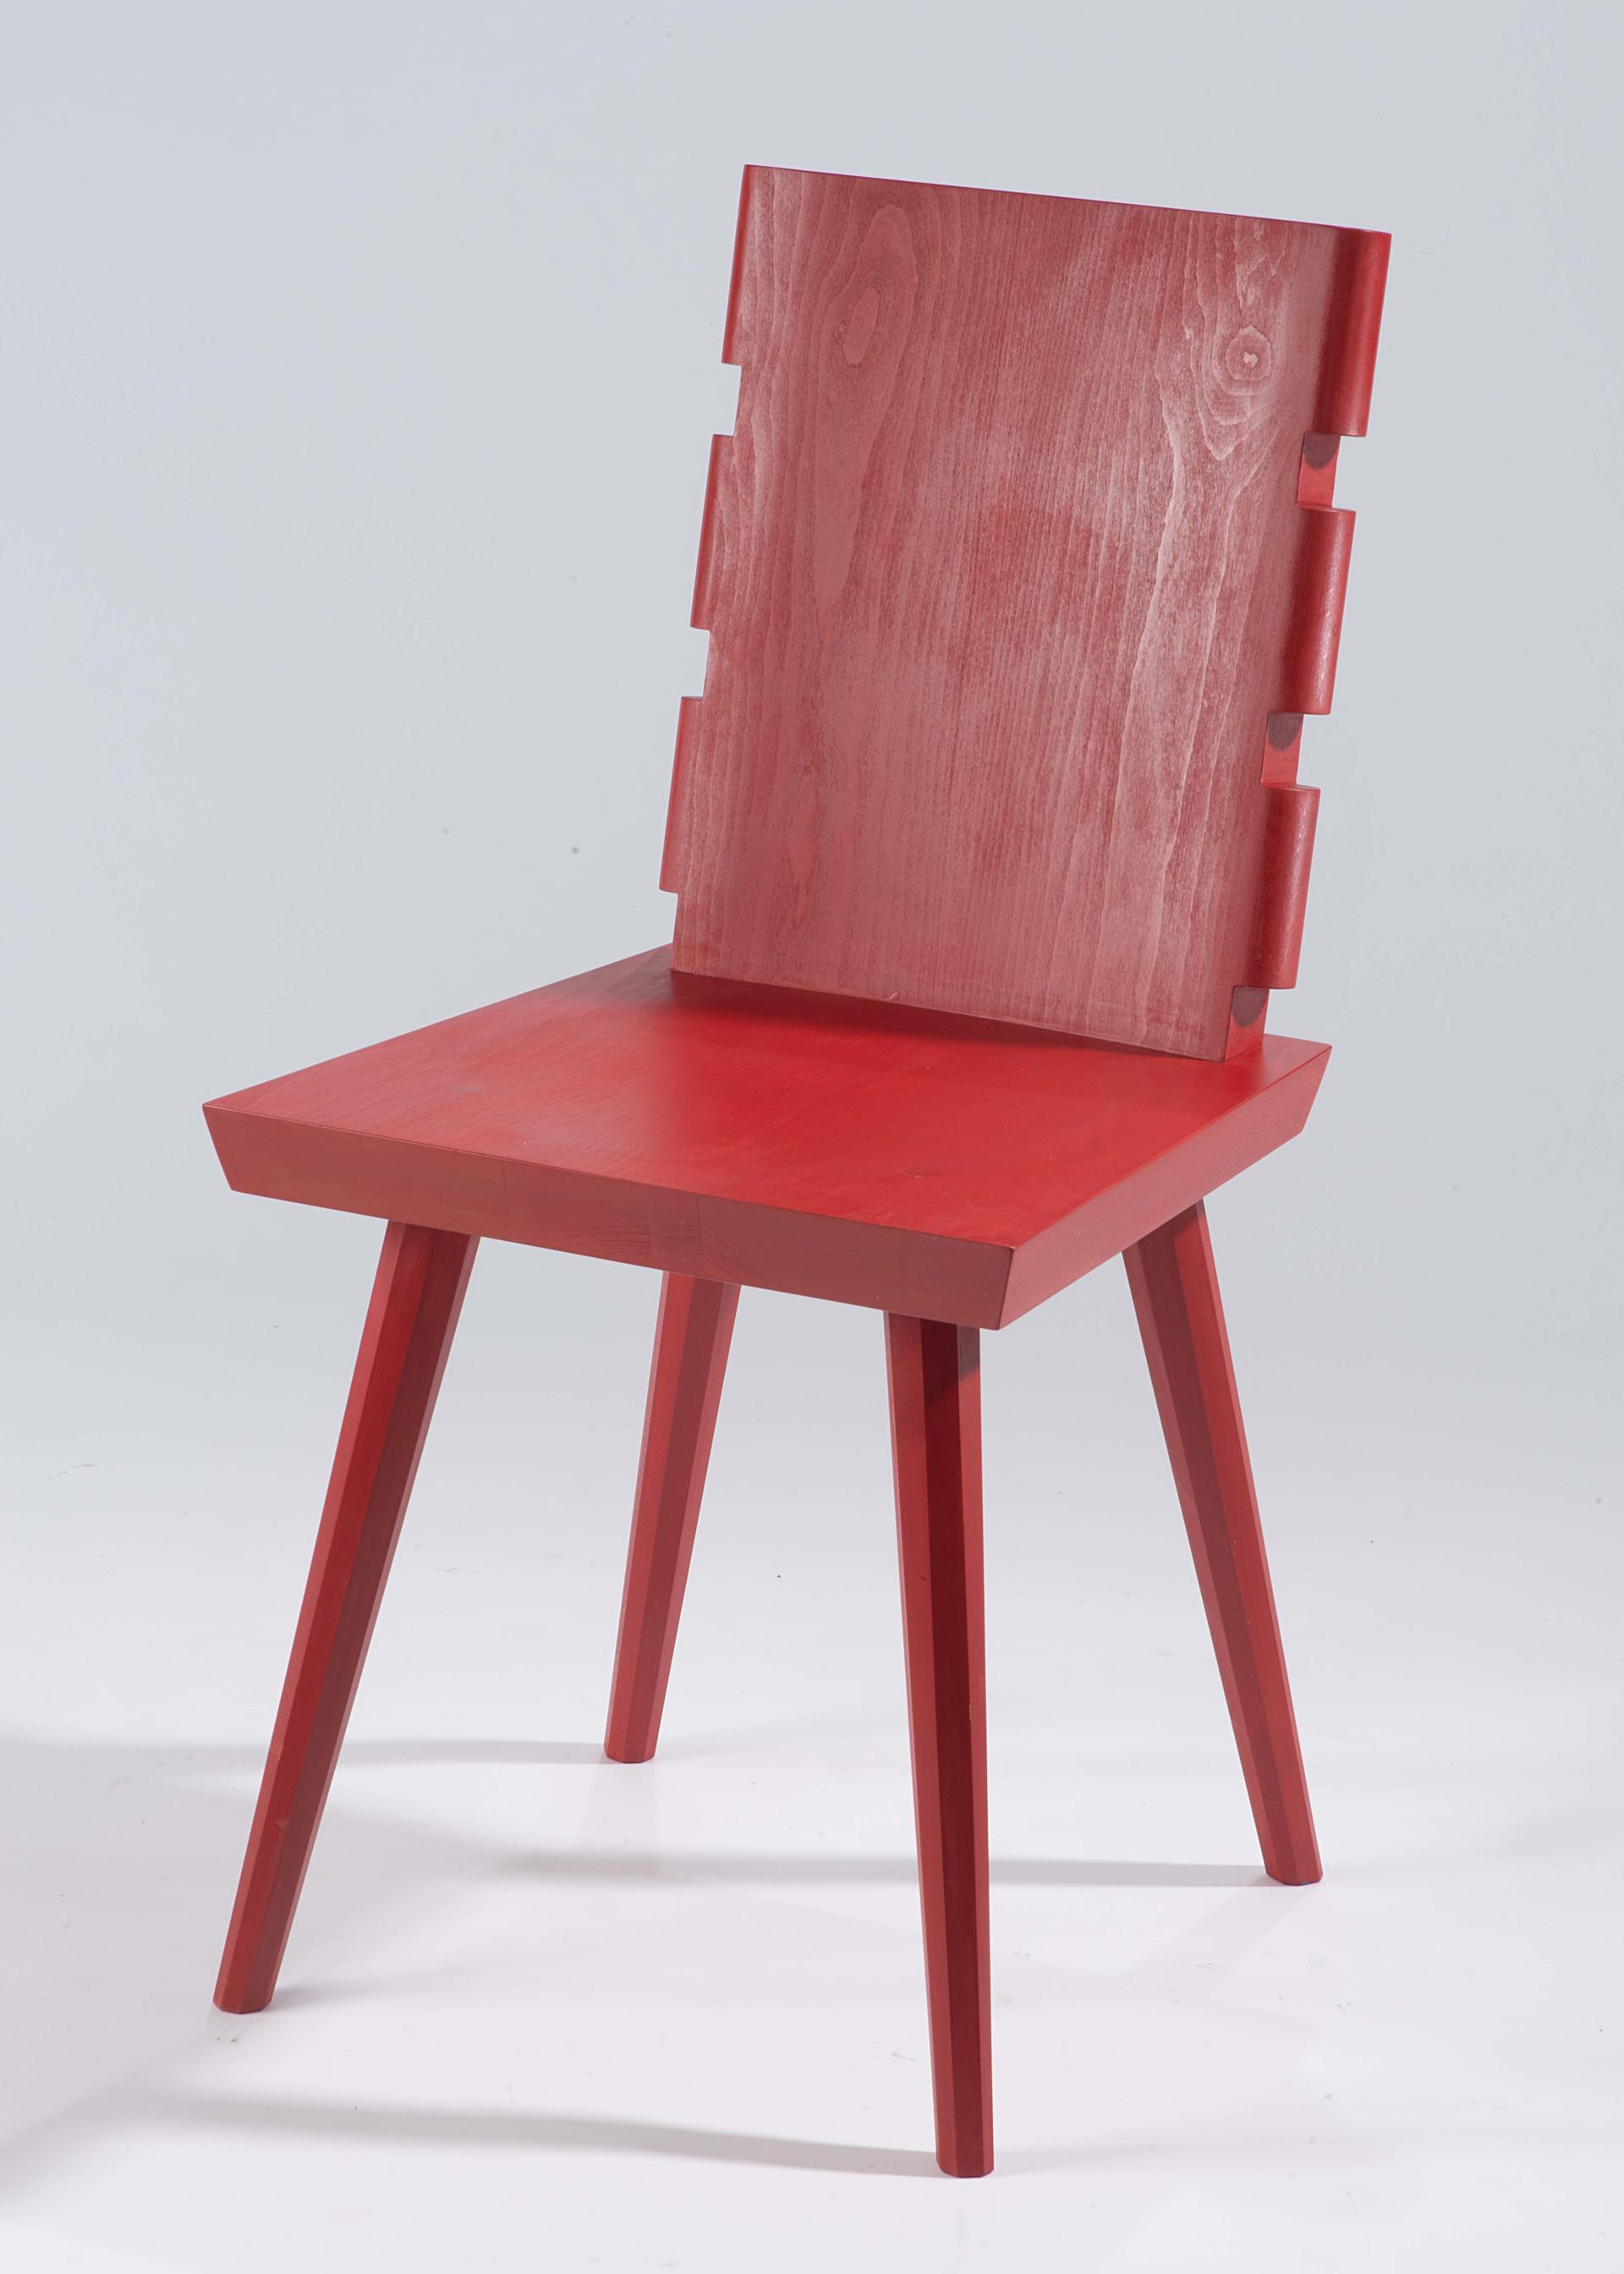 Wooden chair in red finish